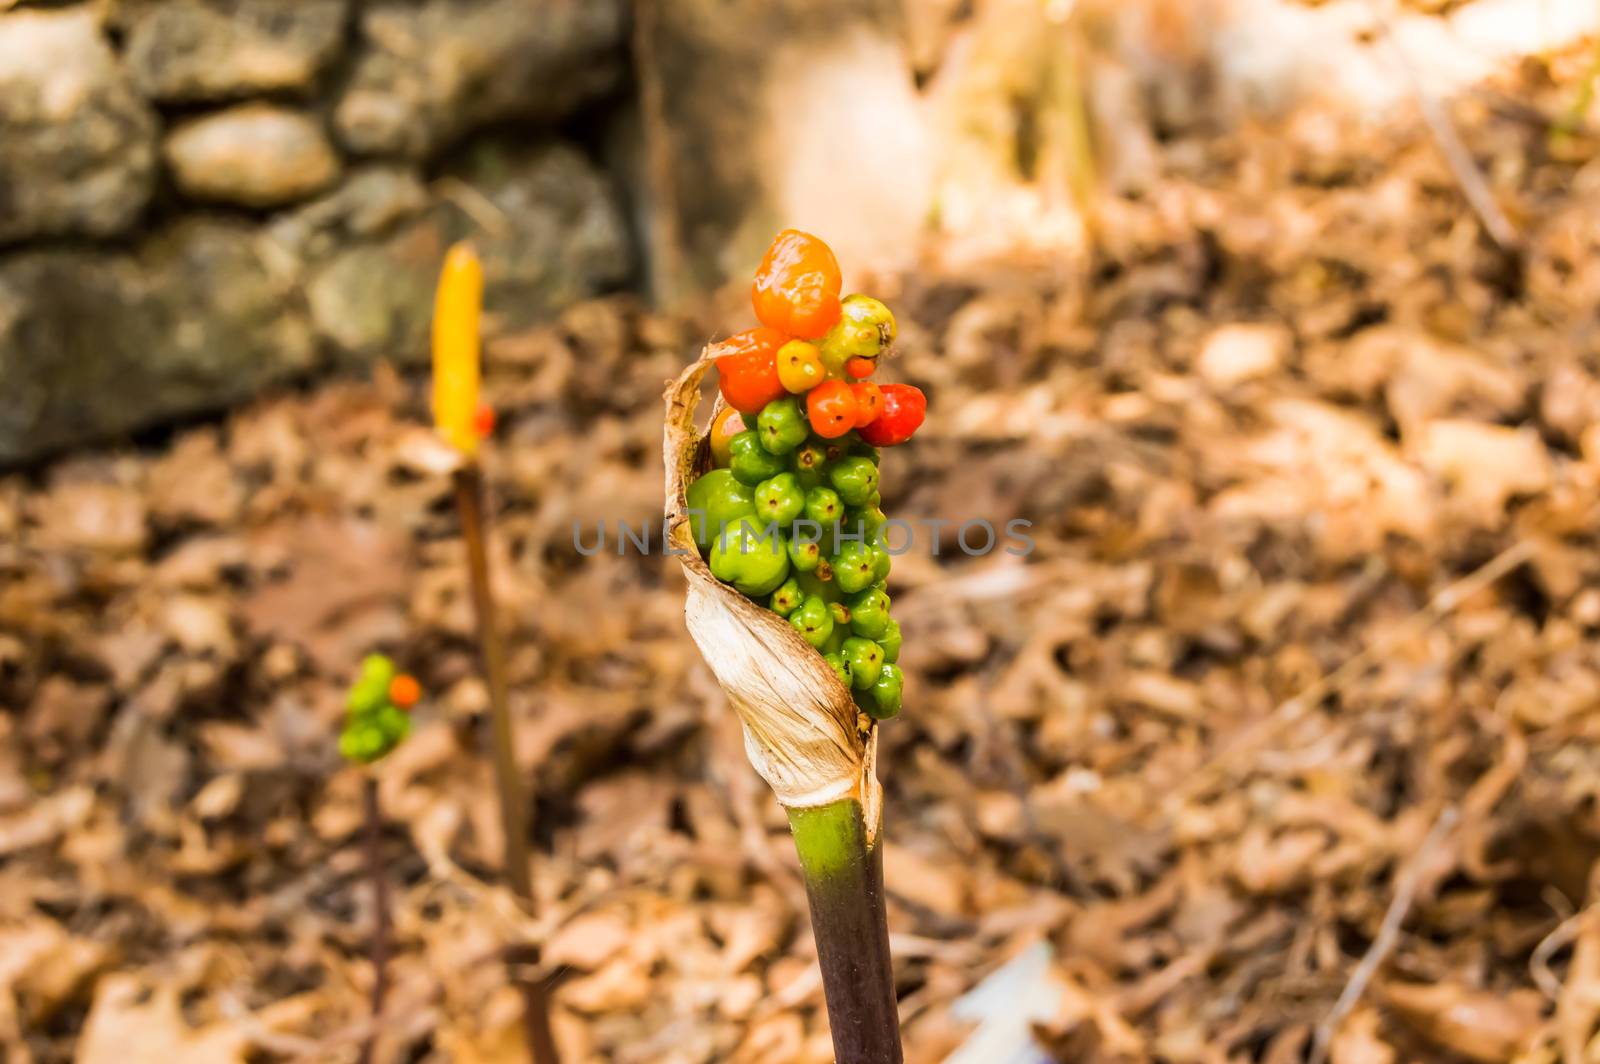 Jack-in-the-pulpit Fruit, Arisaema triphyllum. Spring wild flowe by Philou1000